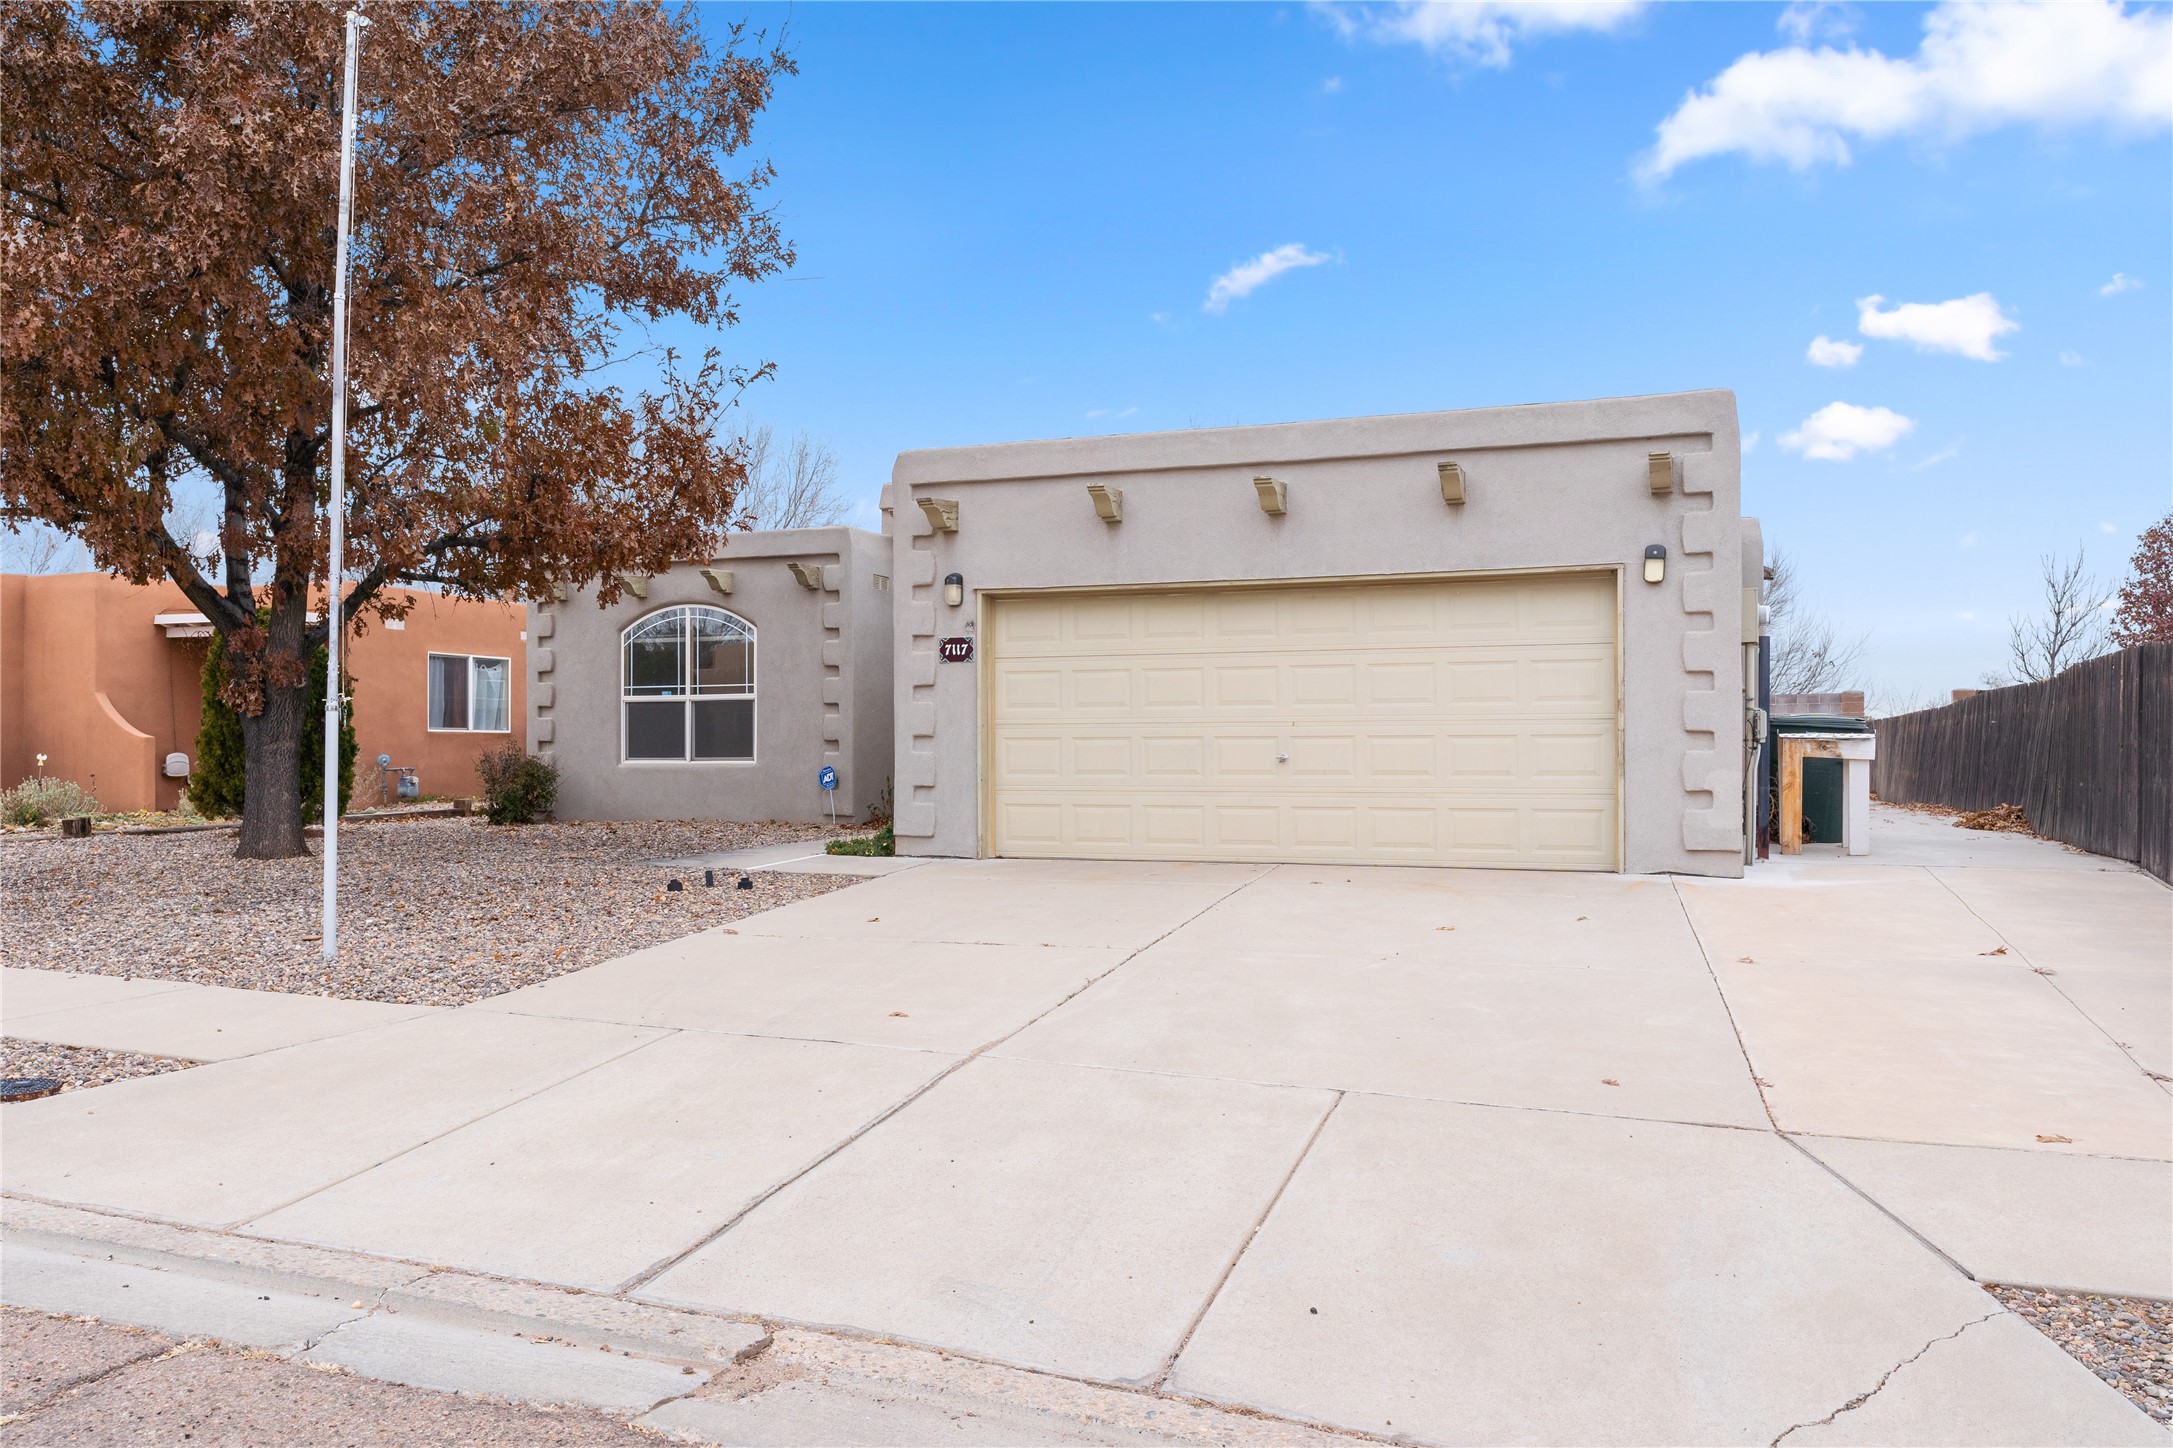 7117 CALLE JENAH, Santa Fe, New Mexico 87507, 3 Bedrooms Bedrooms, ,2 BathroomsBathrooms,Residential,For Sale,7117 CALLE JENAH,202234095